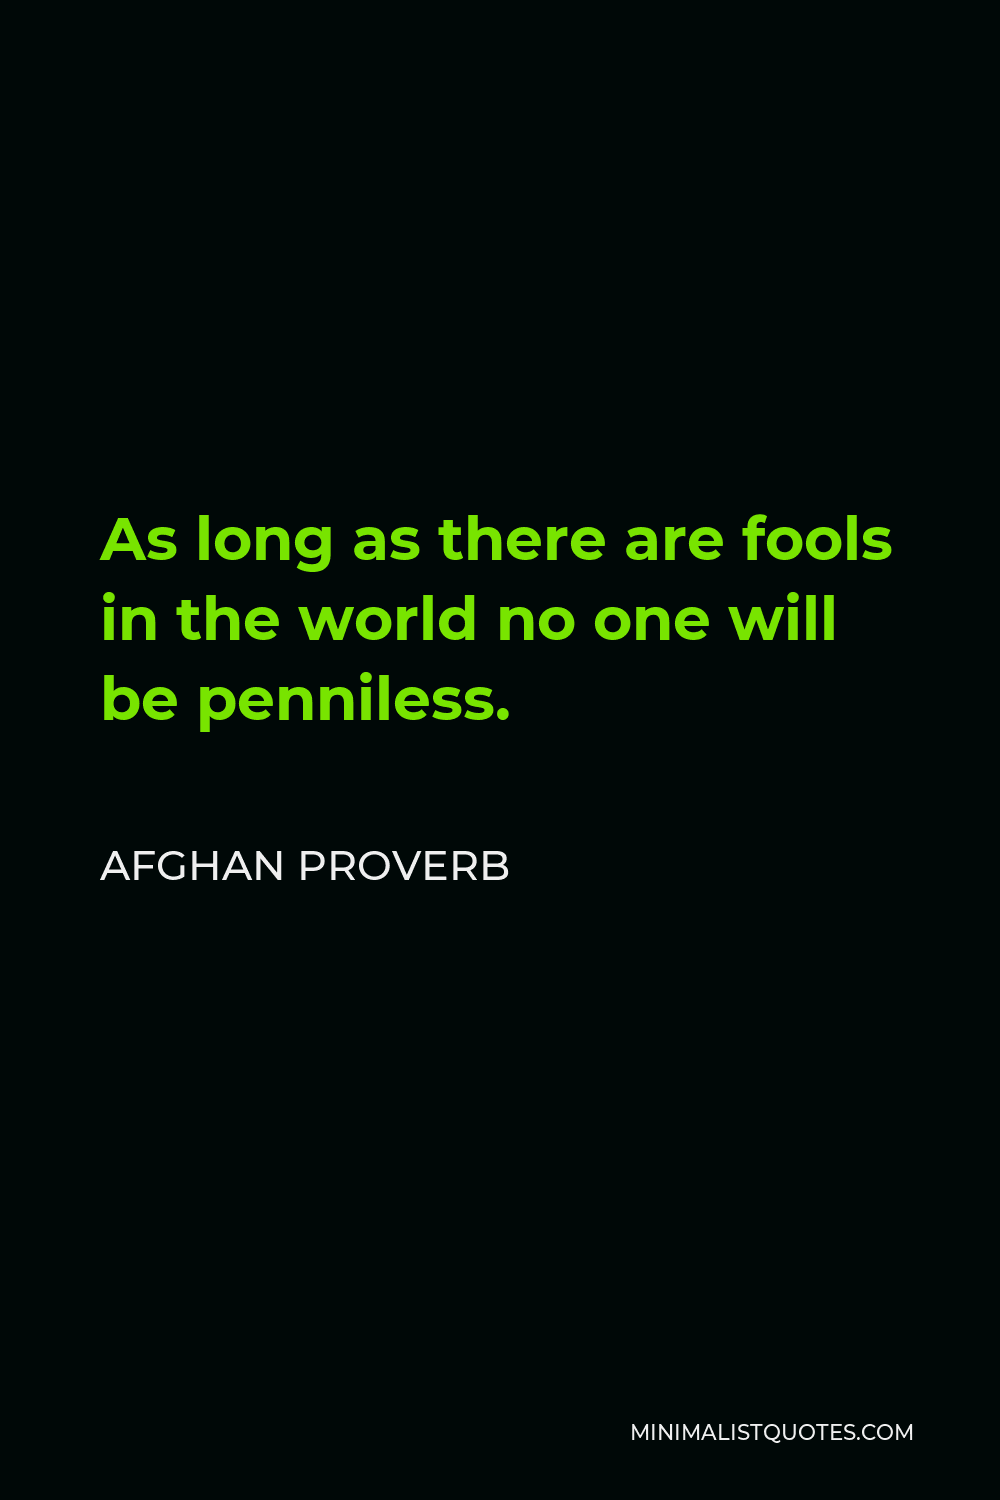 Afghan Proverb Quote - As long as there are fools in the world no one will be penniless.